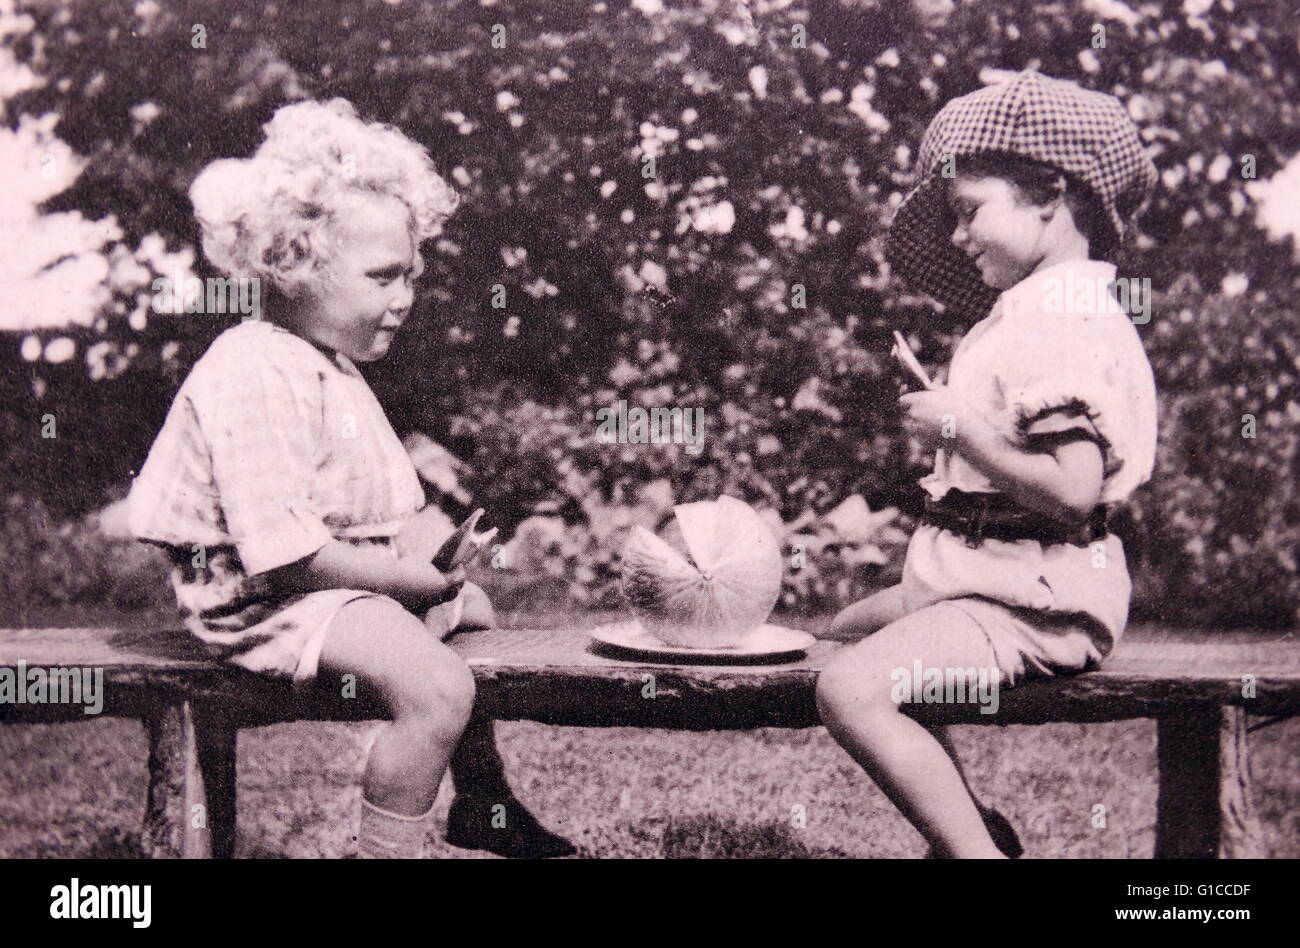 Vintage photograph of two children on a bench with a watermelon 1925 Stock Photo